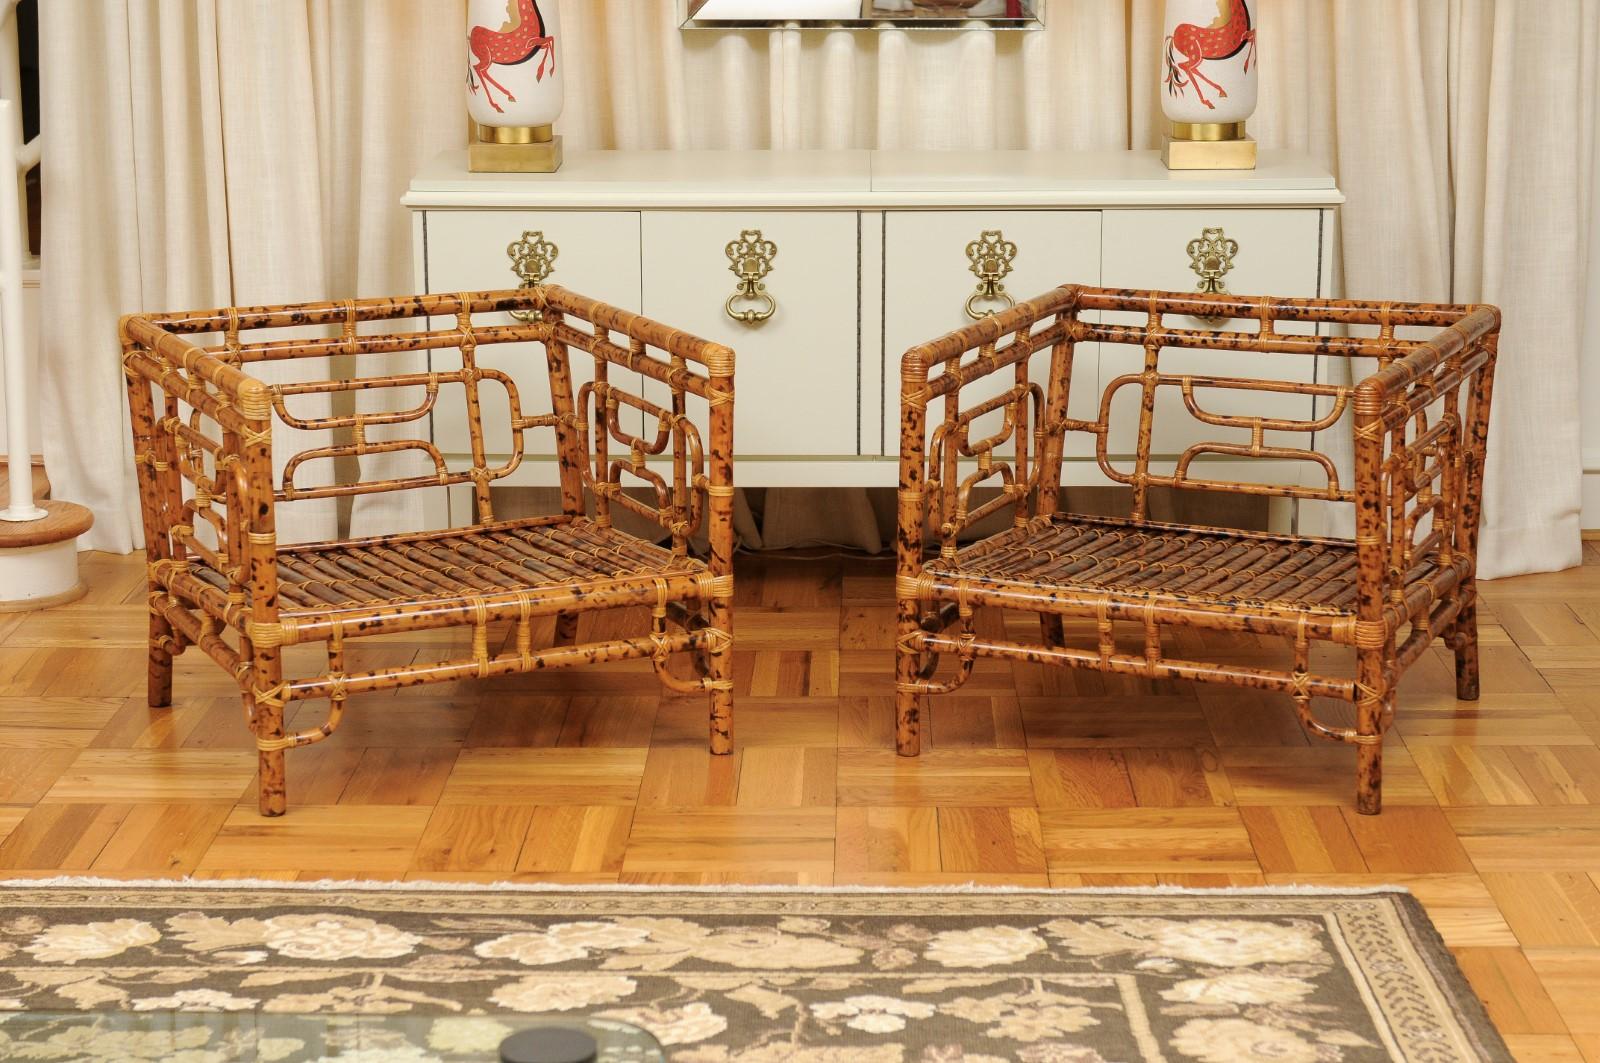 Breathtaking Pair of Tortoiseshell Emperor's Chairs by Vivai del Sud, 1975 For Sale 10